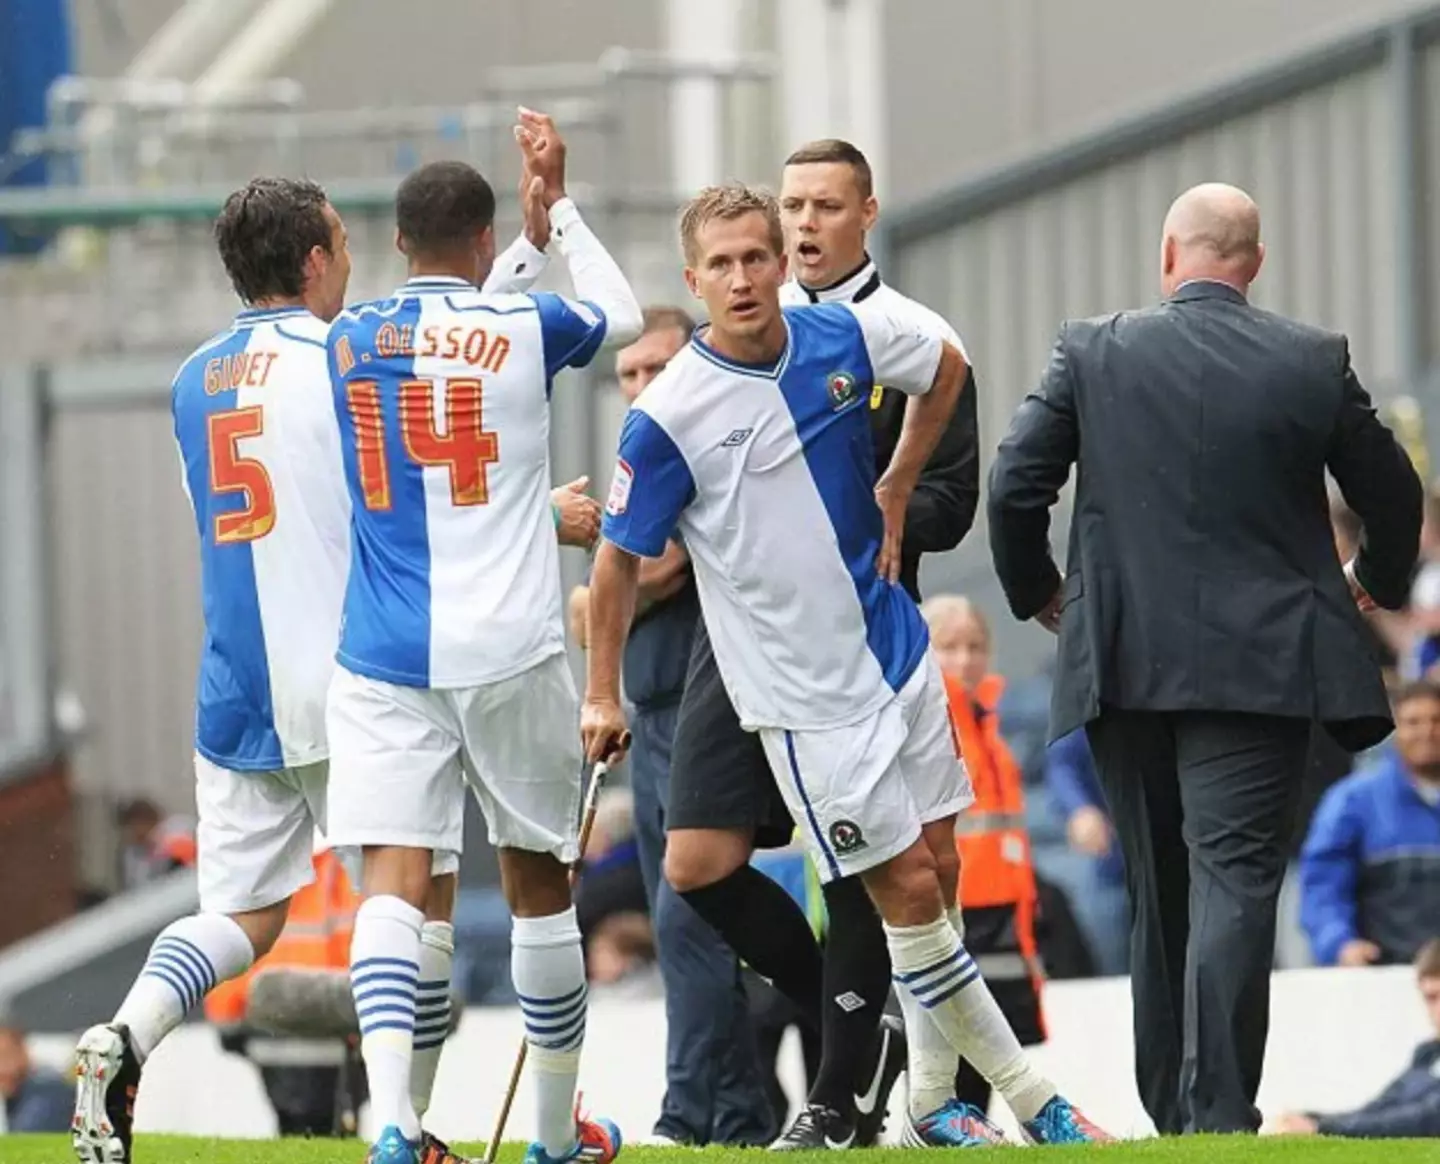 Pedersen celebrates with a walking stick after scoring against Leicester.